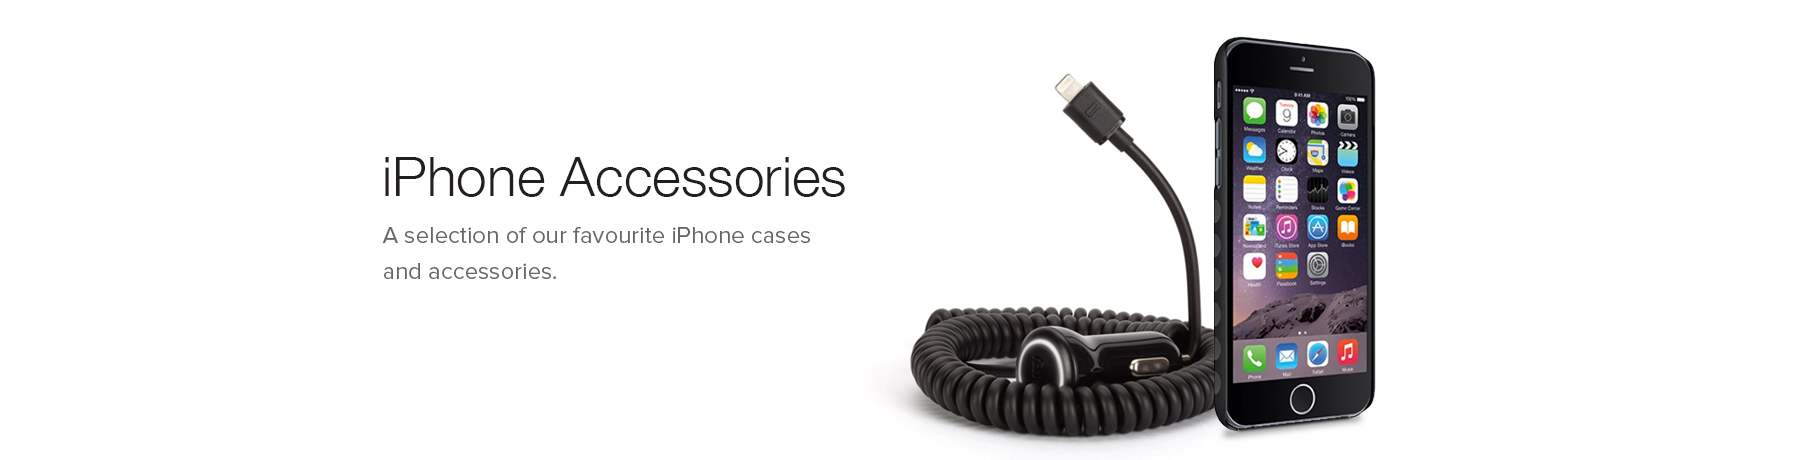 Accessories For iPhone 4